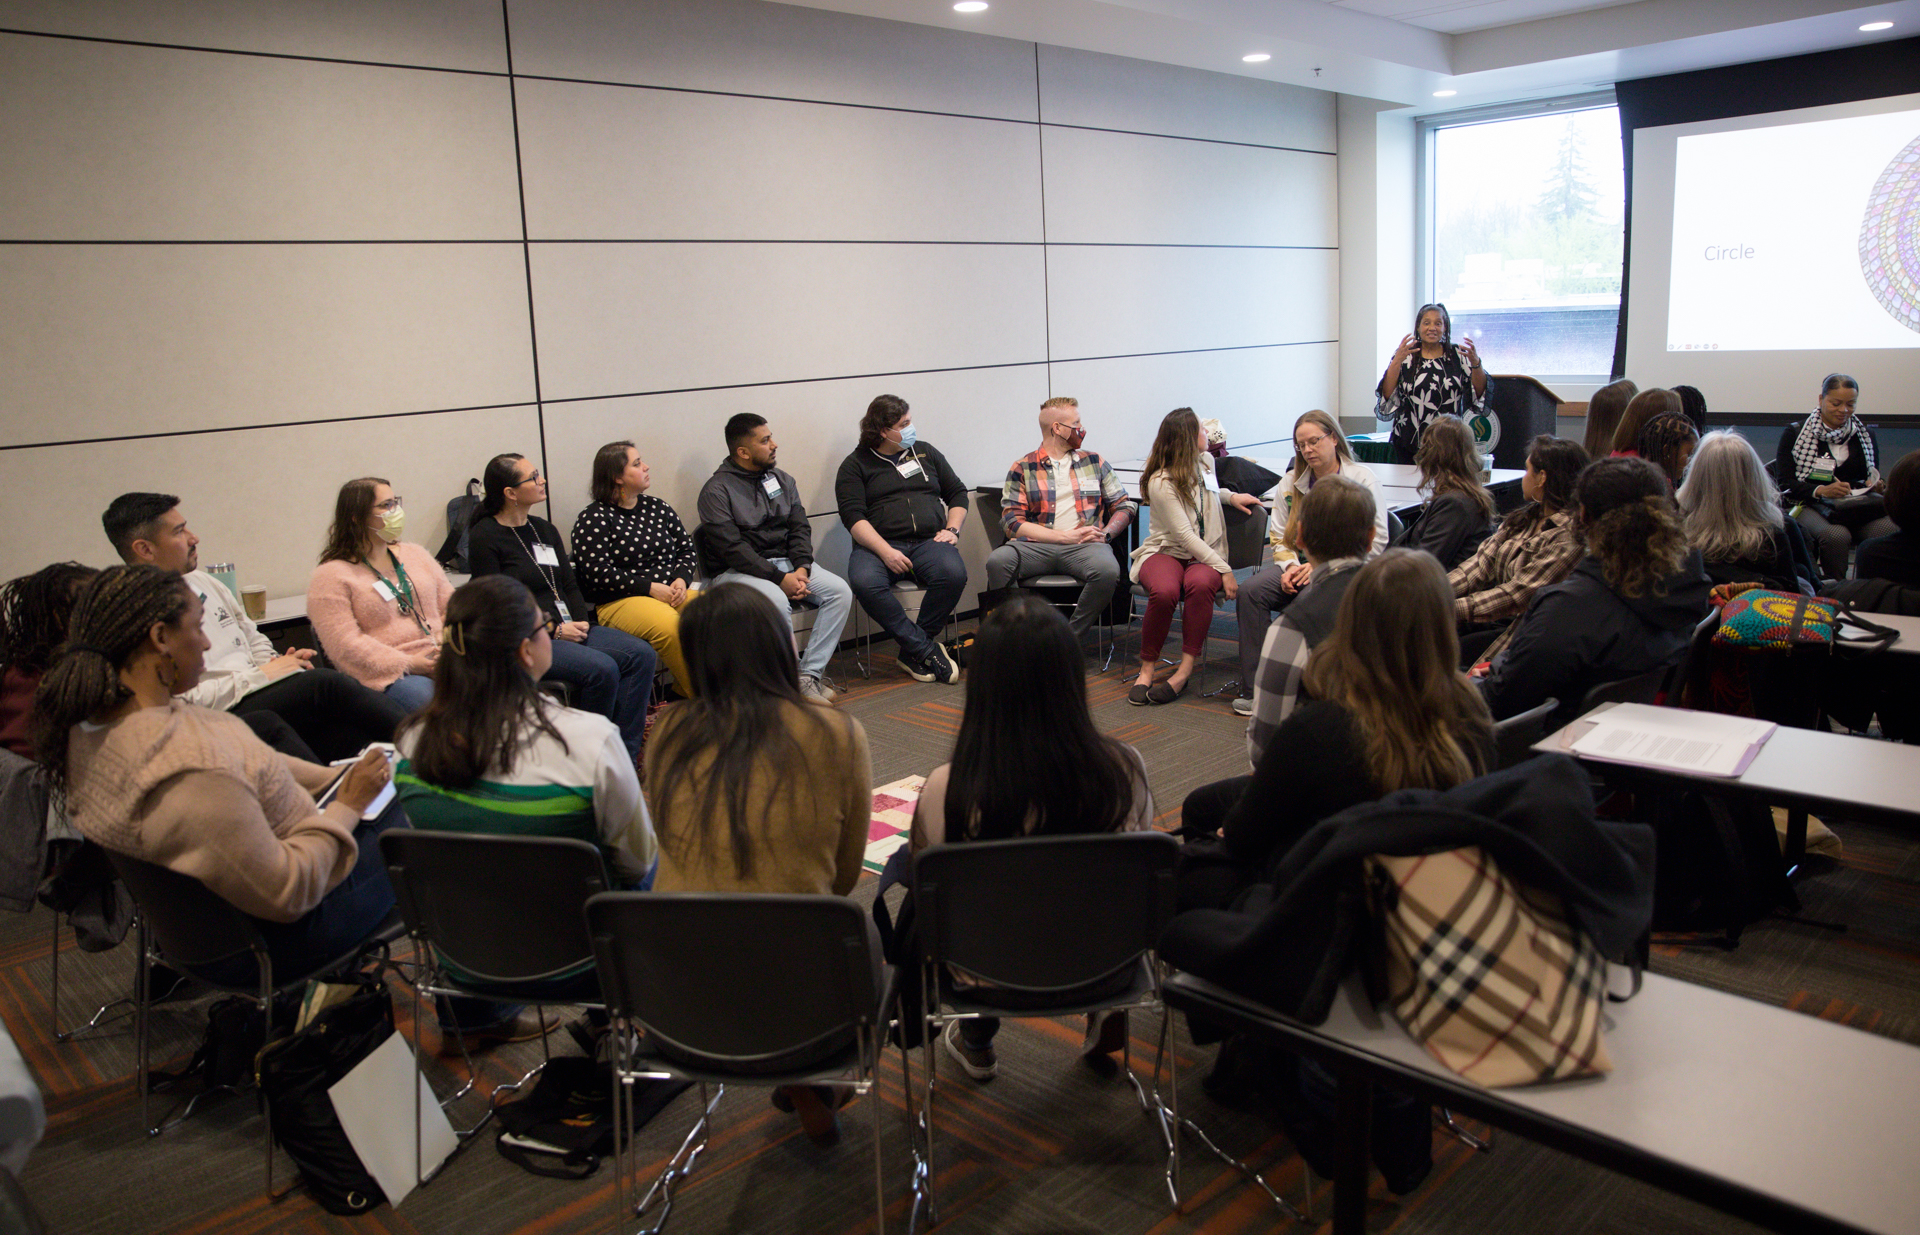 Symposium attendees participate in a workshop, sitting in a circle of chairs.